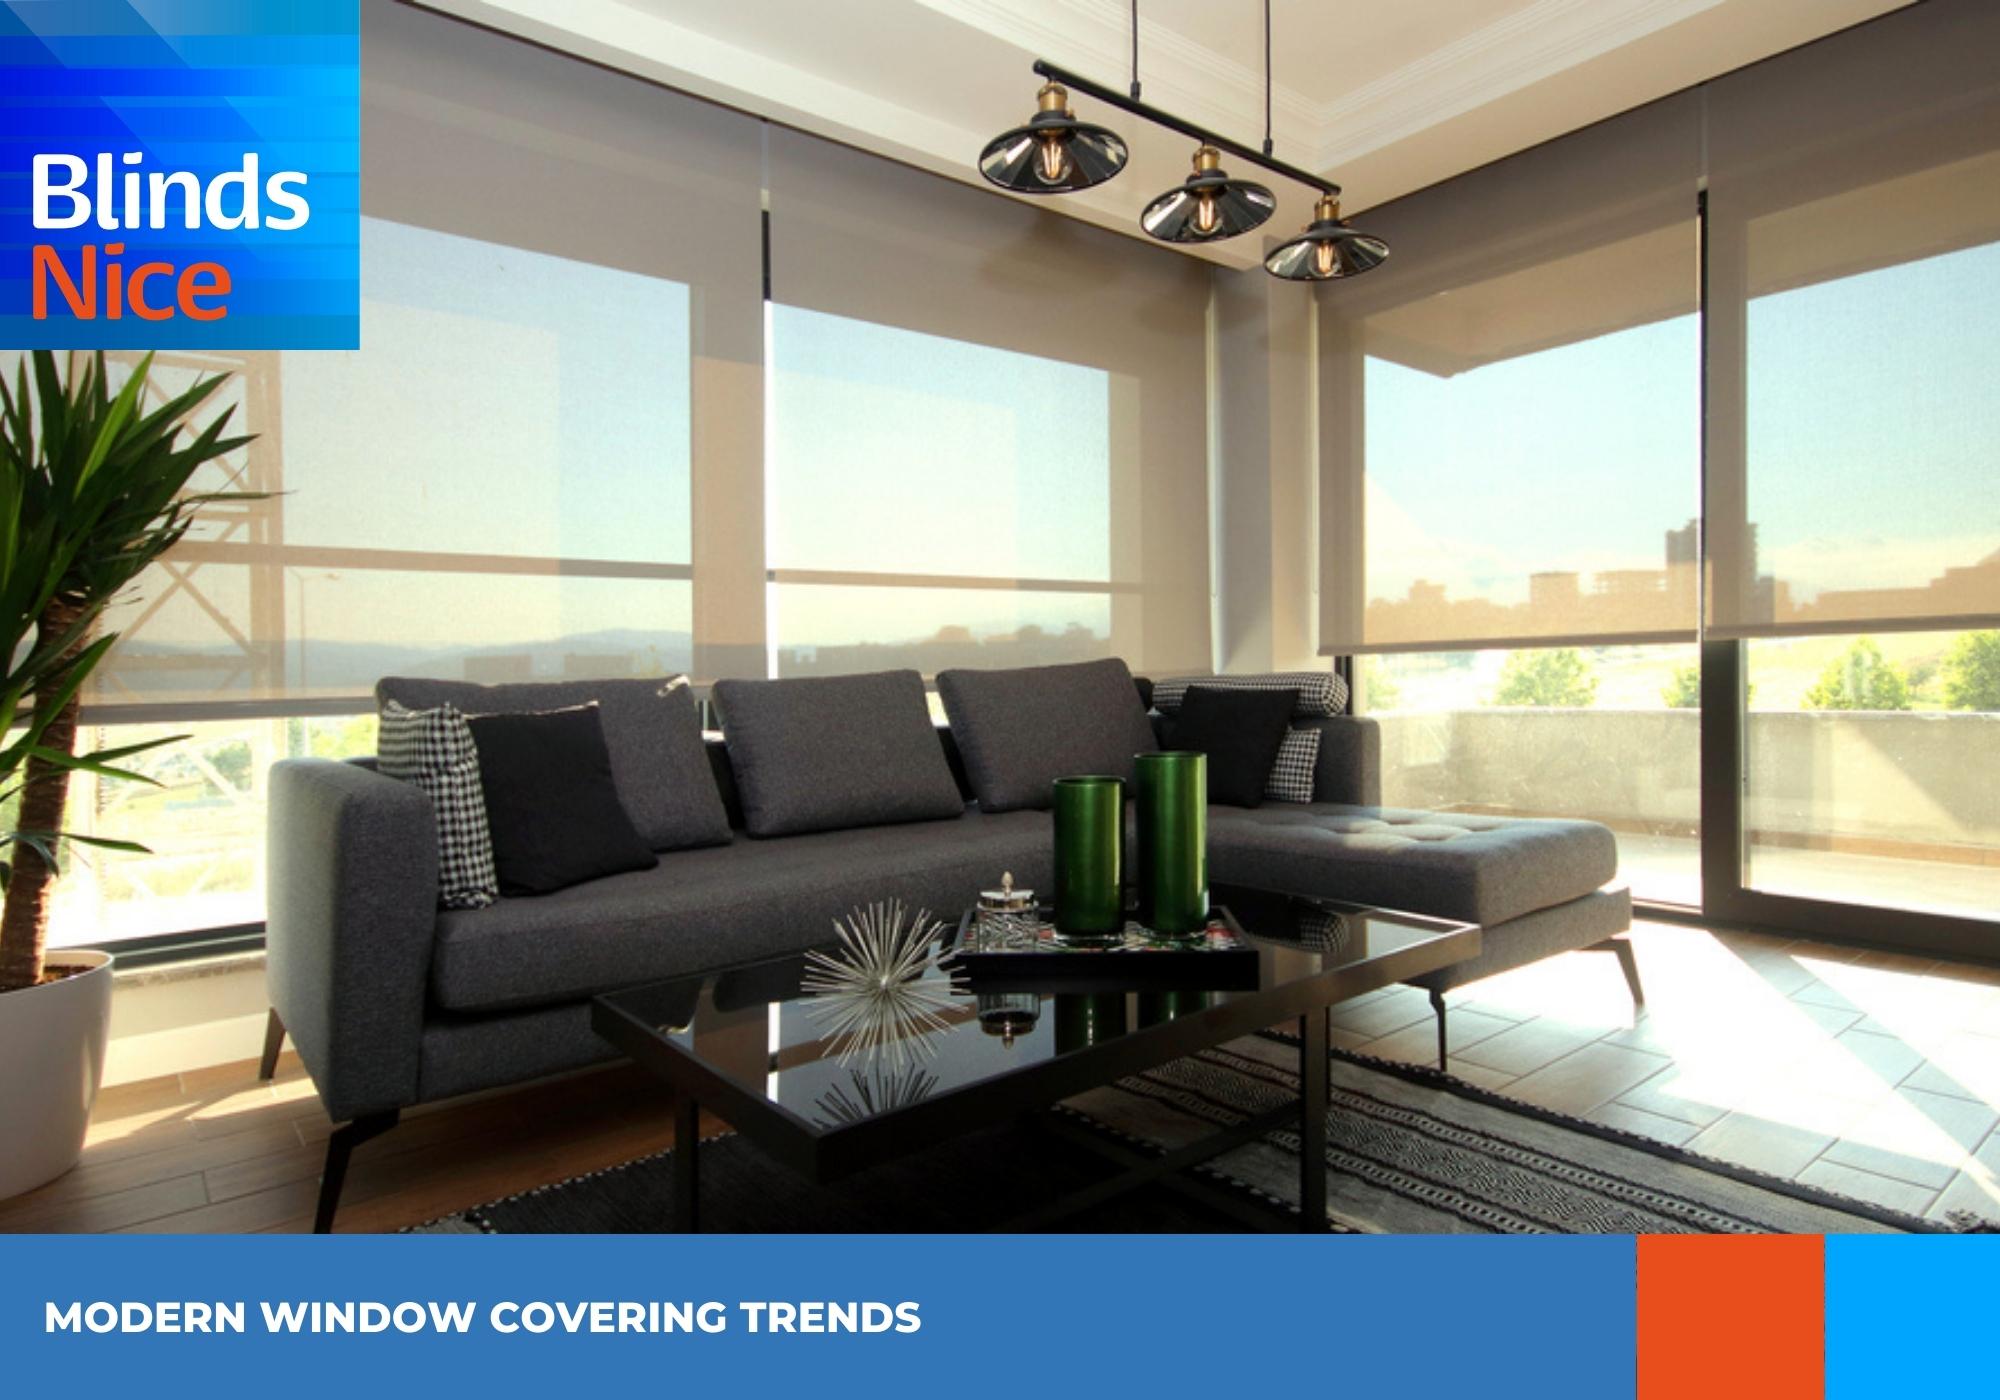 Modern window covering trends